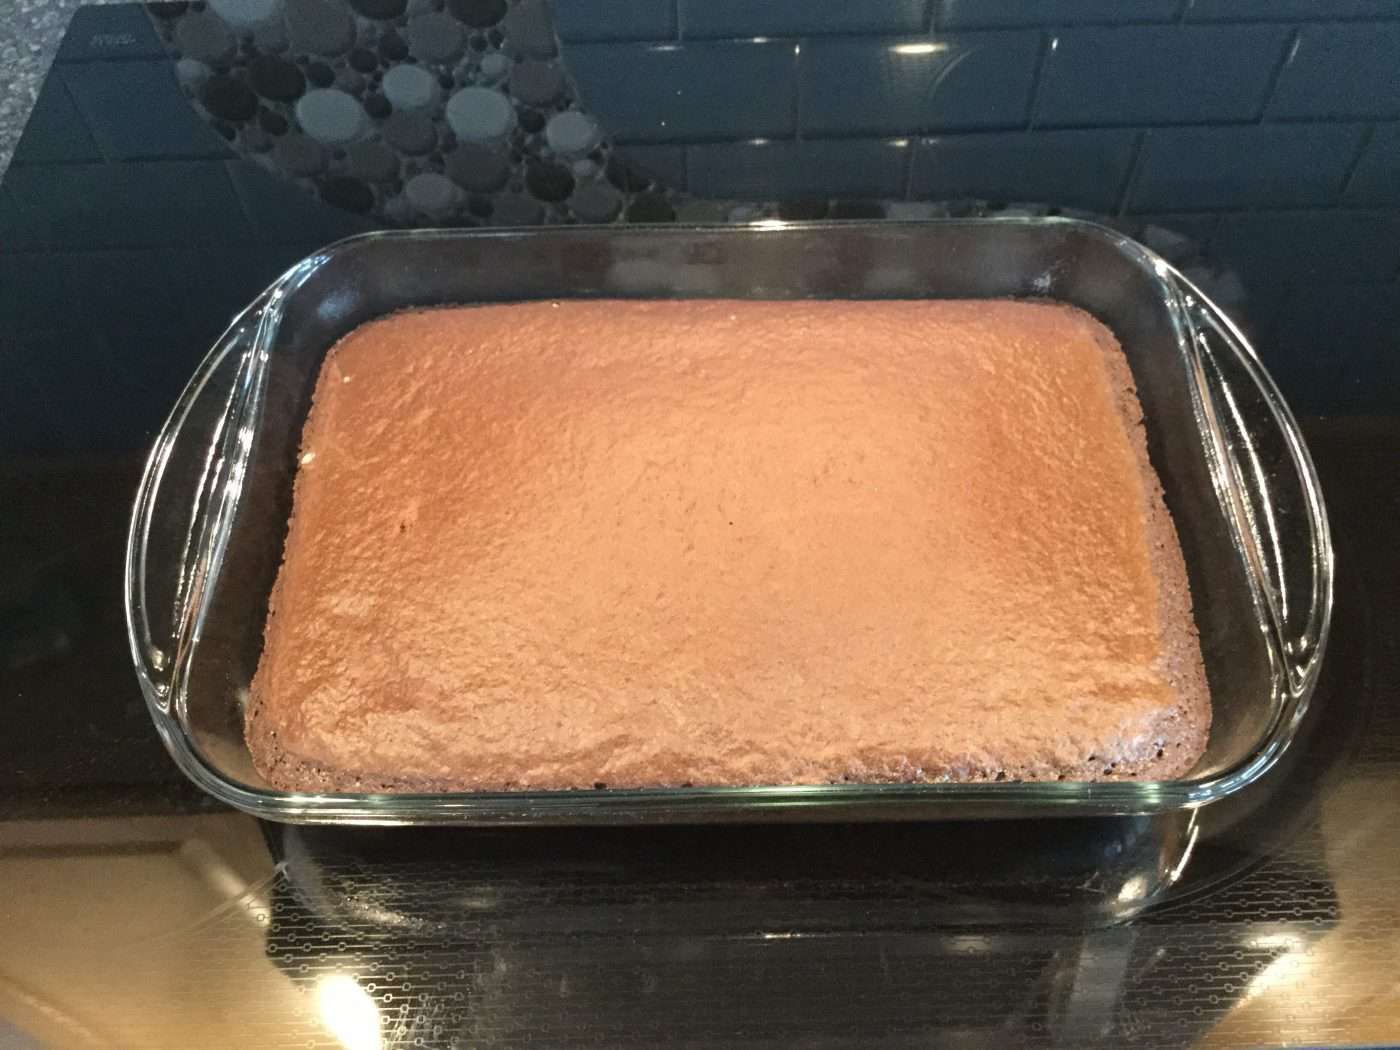 When your cake is done, pull it out and let it cool completely.